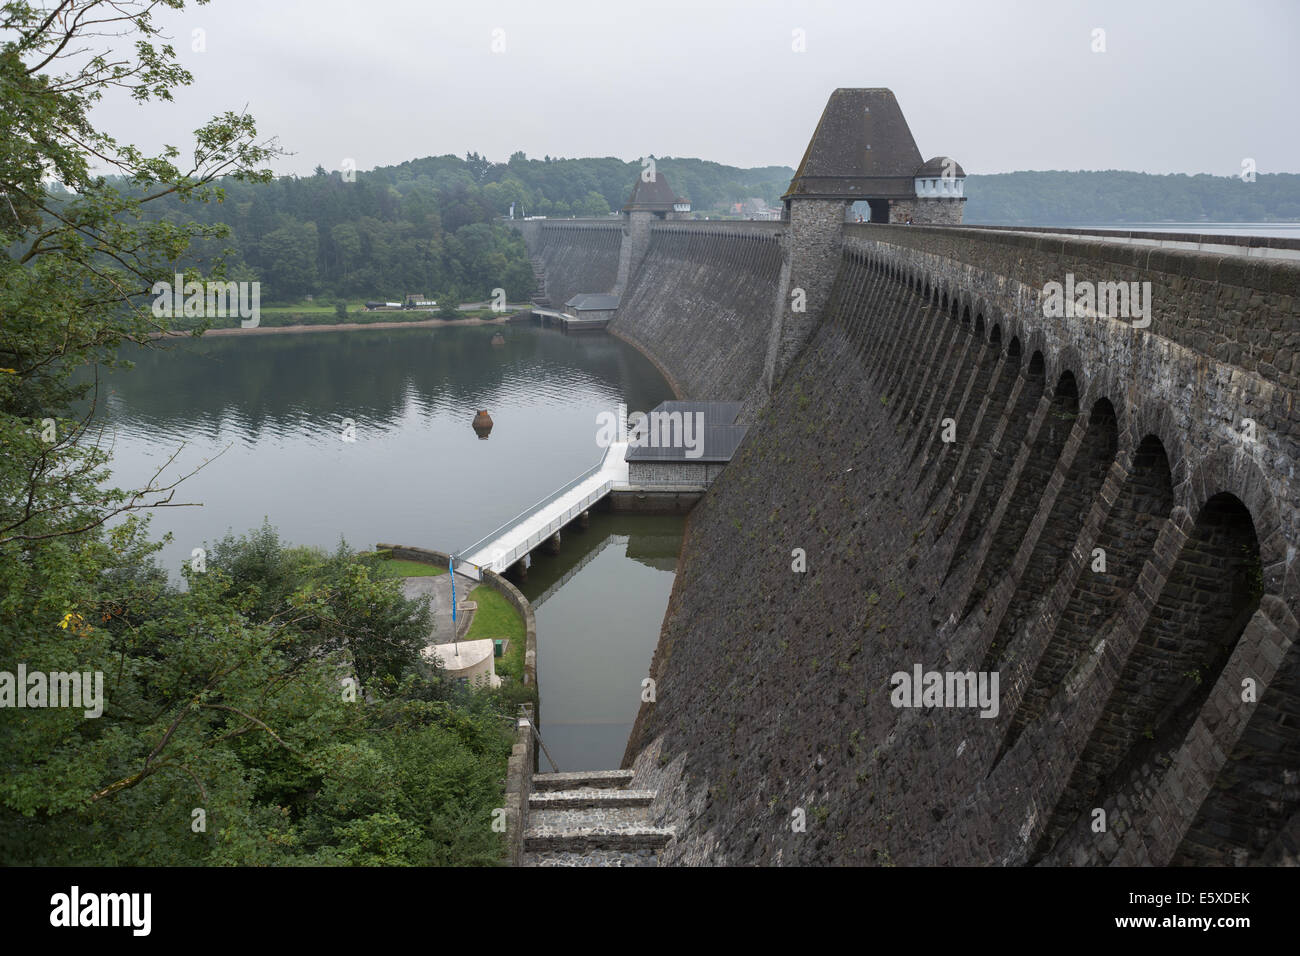 The Möhnesee dam wall, Germany Stock Photo